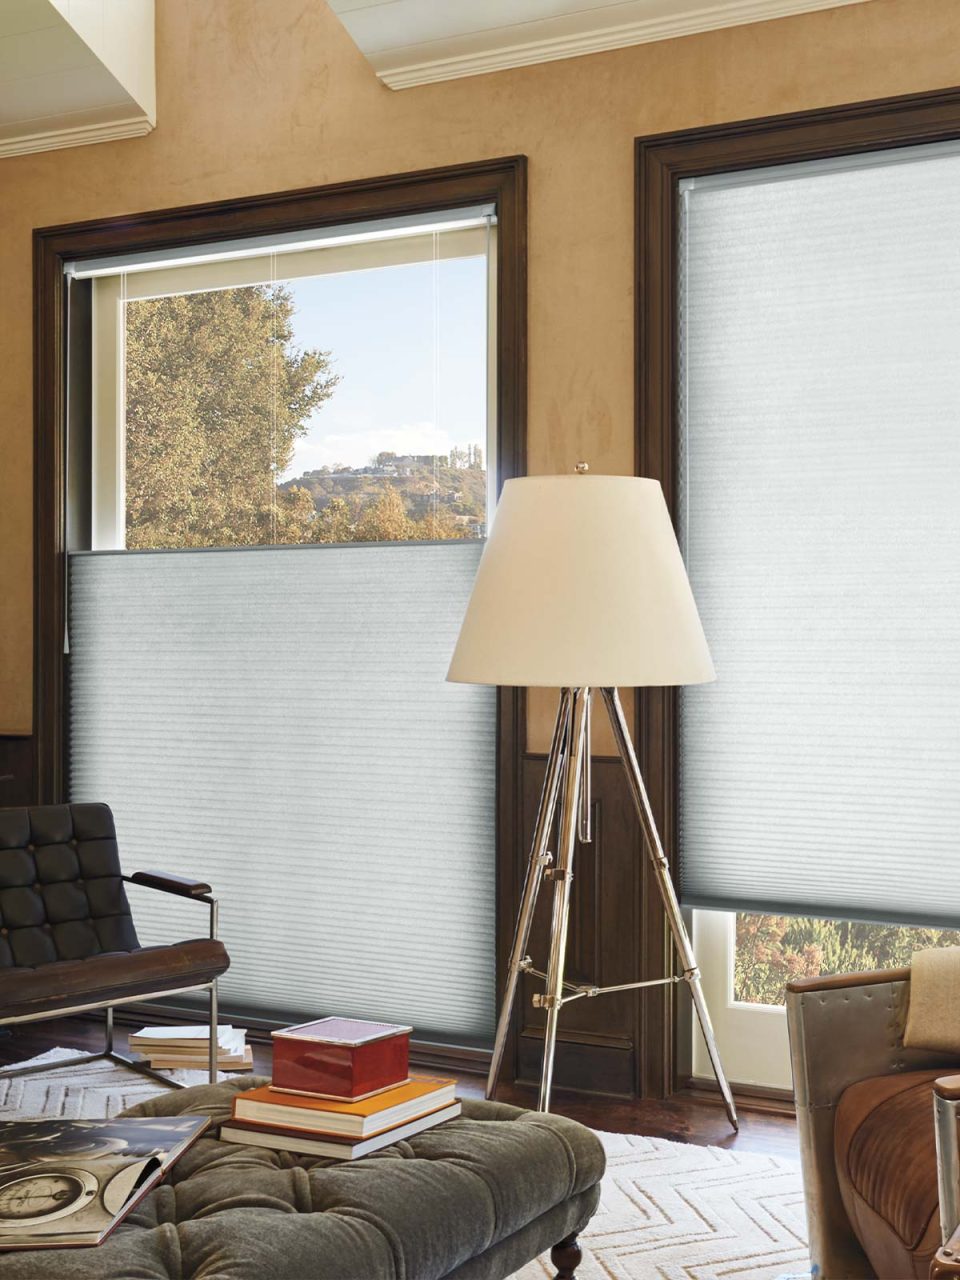 Hunter Douglas Cellular Shades with Top-Down/Bottom-Up Operating System